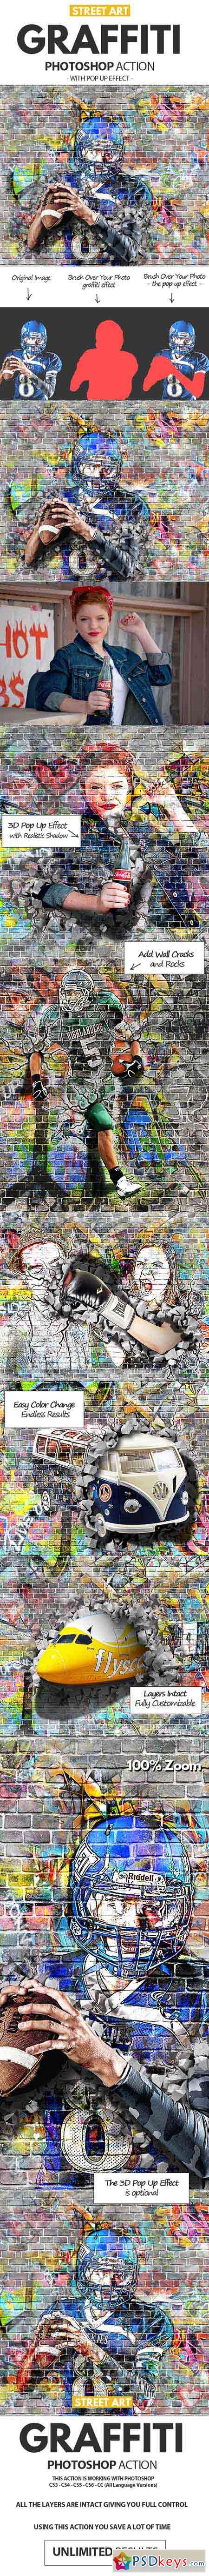 Graffiti Effect with Pop Up Photoshop Action 19496232